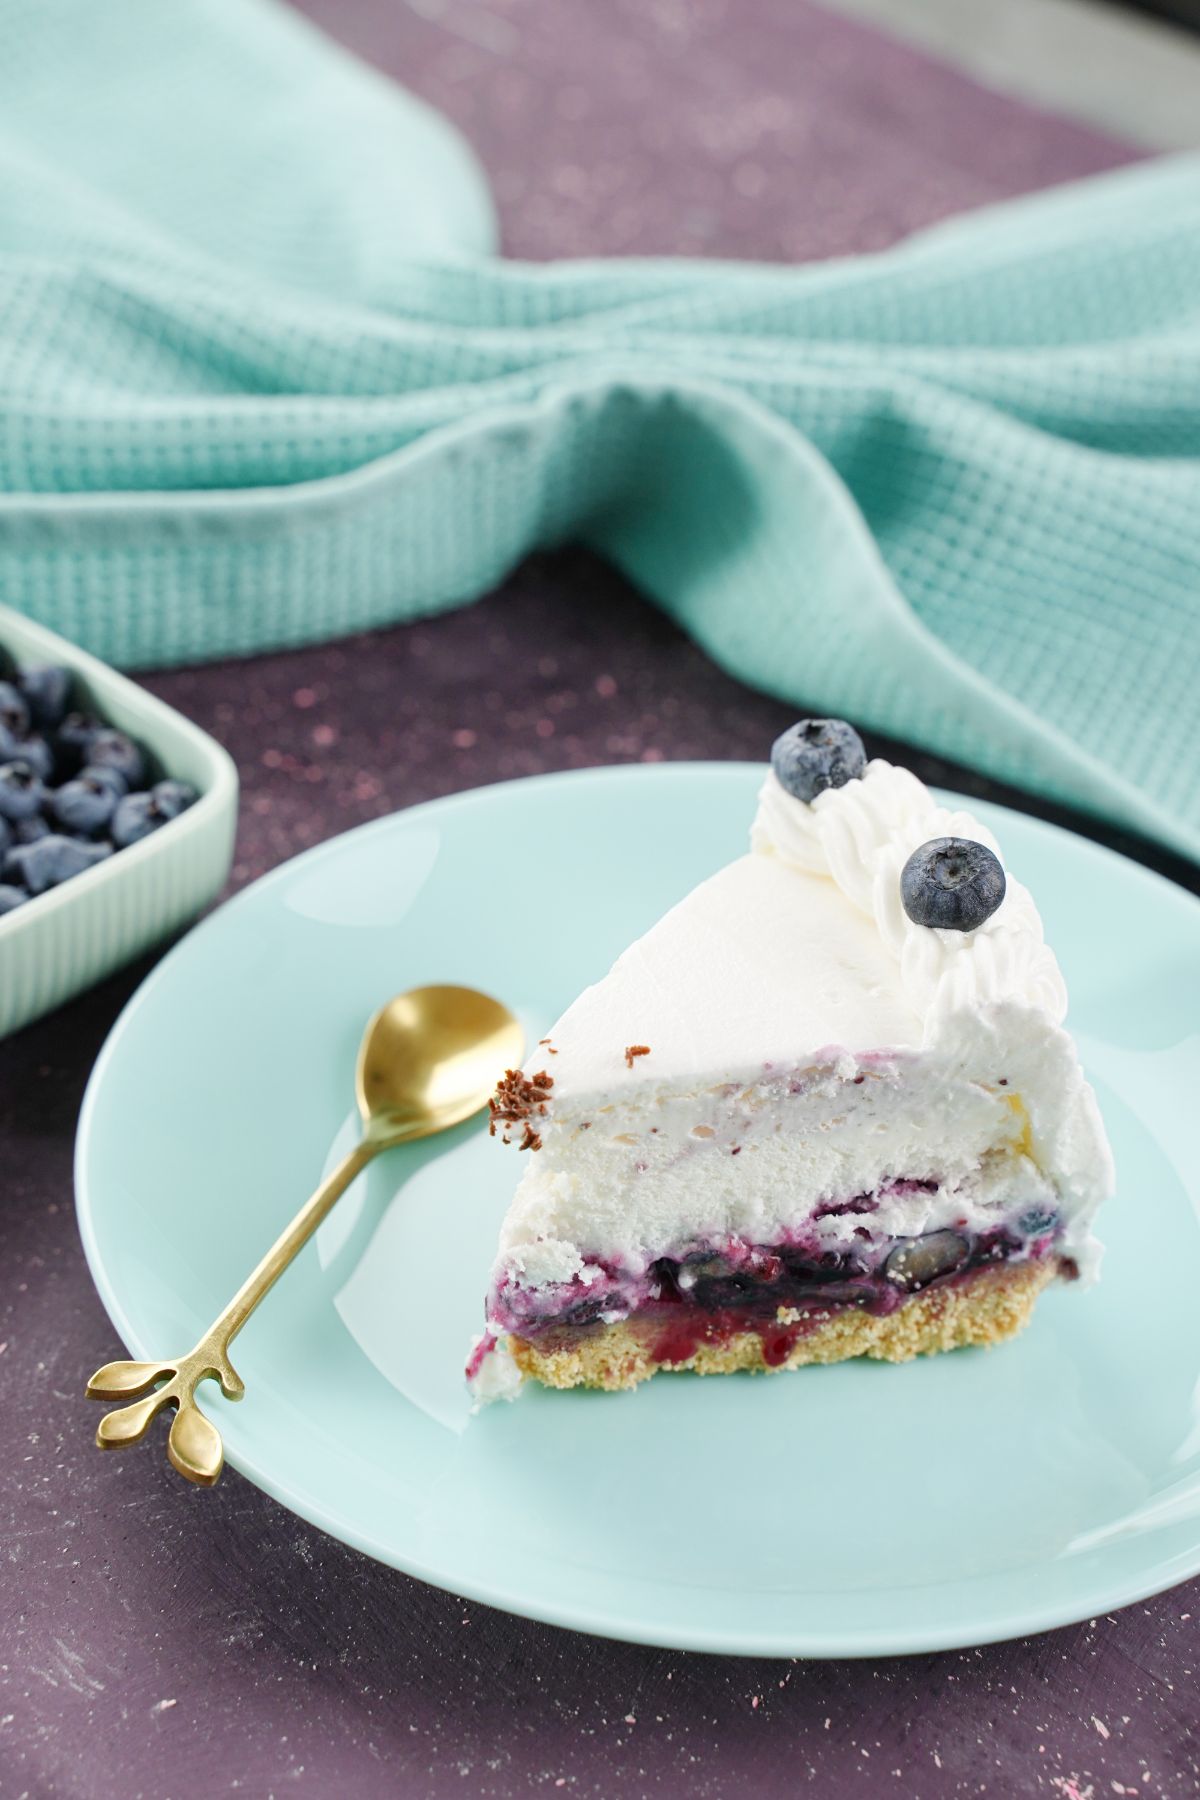 No-Bake Blueberry Pie served in a plate with golden spoon